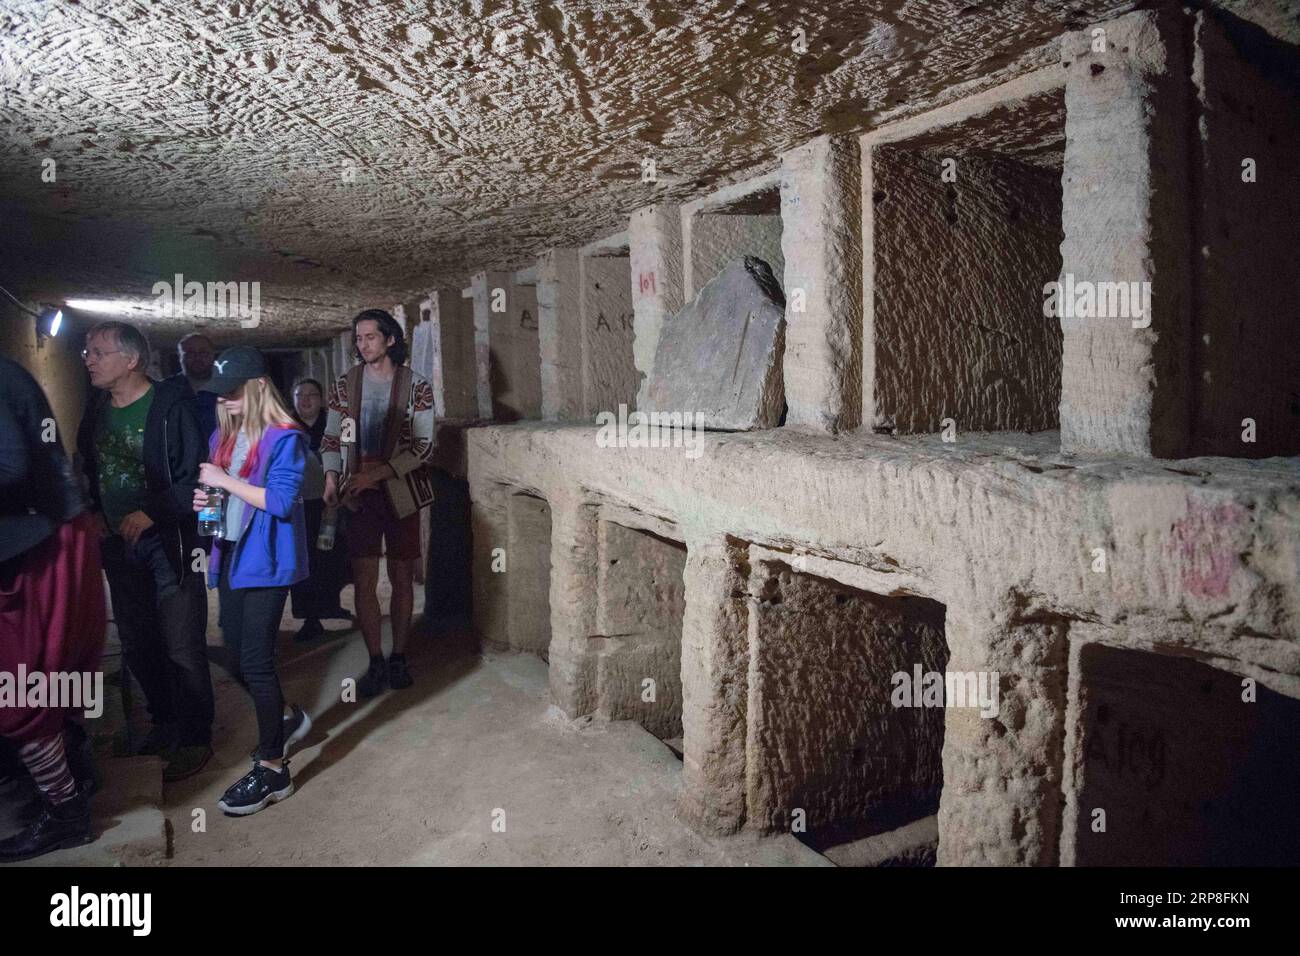 (190303) -- ALEXANDRIA (EGYPT), March 3, 2019 -- People visit the catacombs of ancient Kom al-Shoqafa tombs in the northern seaside Alexandria province, Egypt, on March 3, 2019. The Egyptian Ministry of Antiquities celebrated on Sunday the completion of a project removing underground water from 2,000-year-old catacombs in the northern seaside province of Alexandria dating back to the Greco-Roman era. ) EGYPT-ALEXANDRIA-GRECO-ROMAN CATACOMBS WuxHuiwo PUBLICATIONxNOTxINxCHN Stock Photo